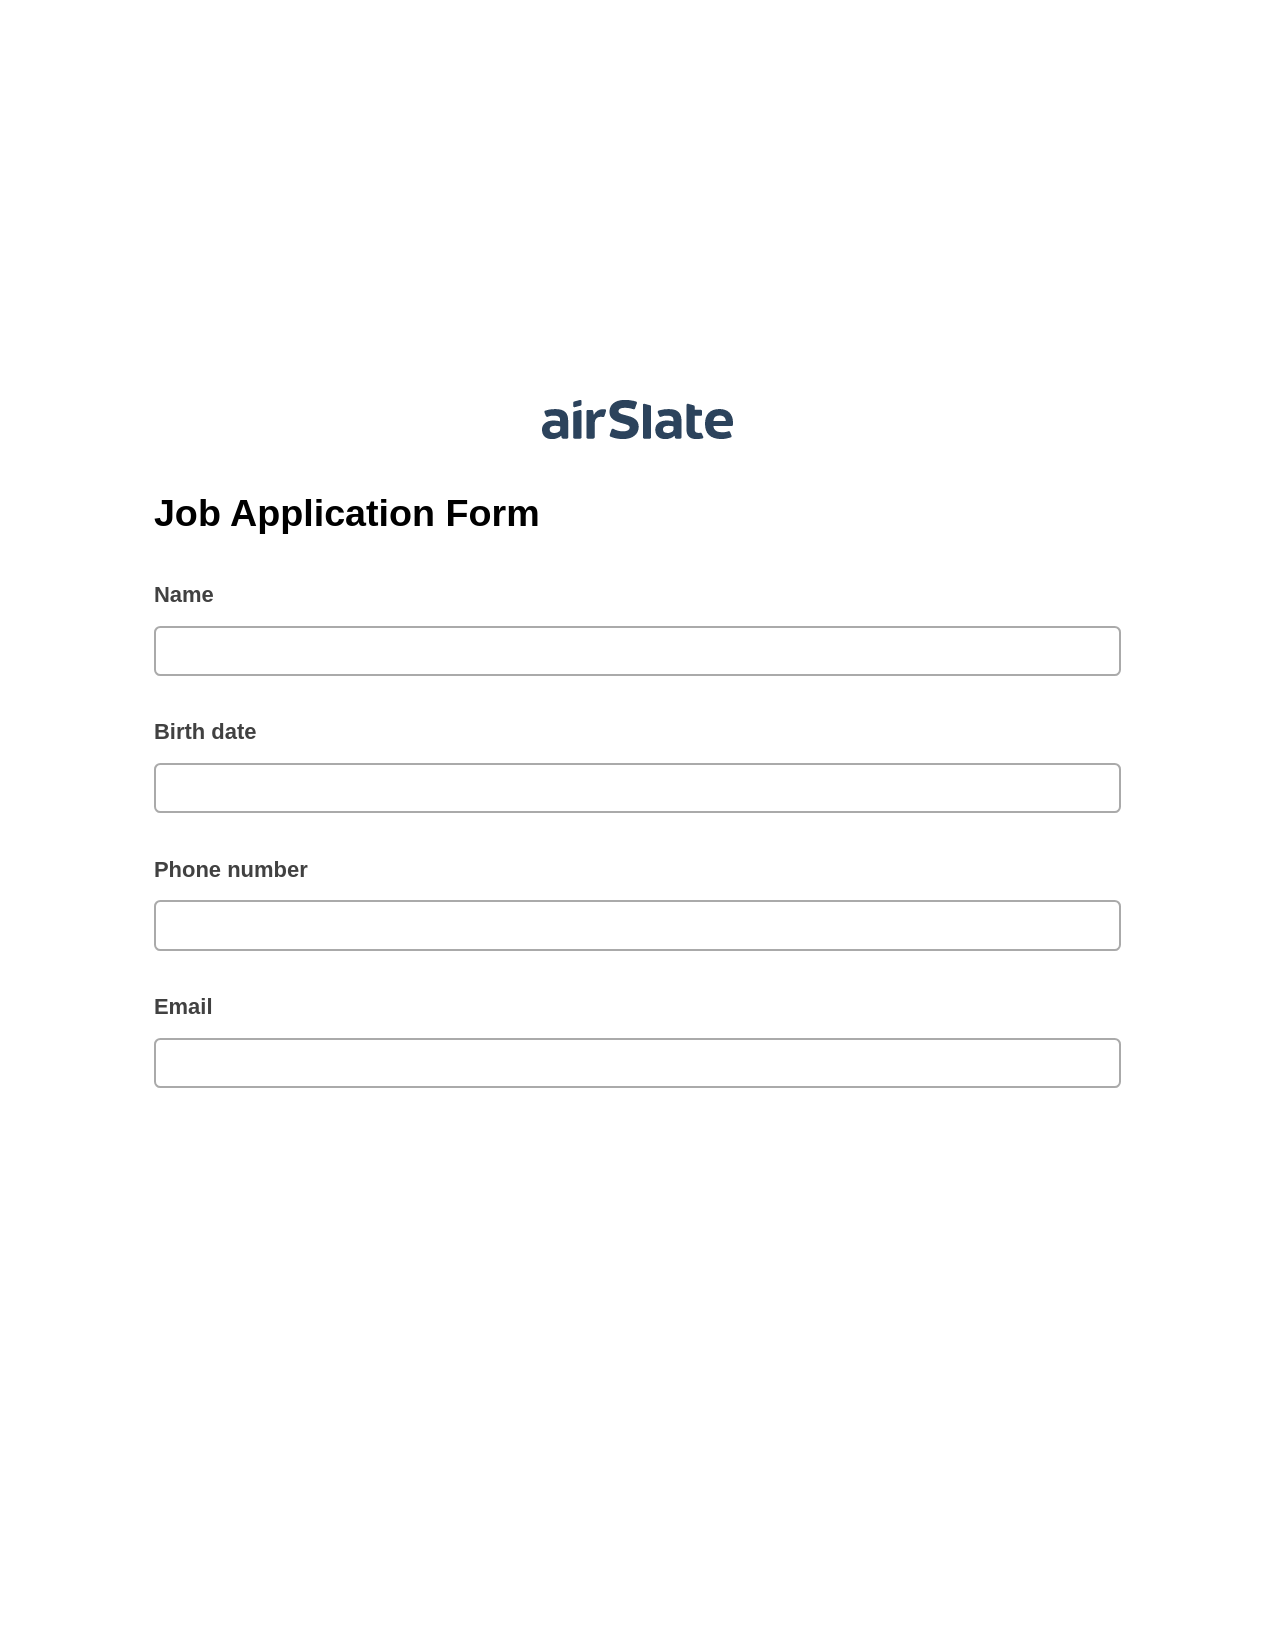 Job Application Form Pre-fill from Excel Spreadsheet Bot, Create Slate every Google Sheet Update Bot, Archive to SharePoint Folder Bot